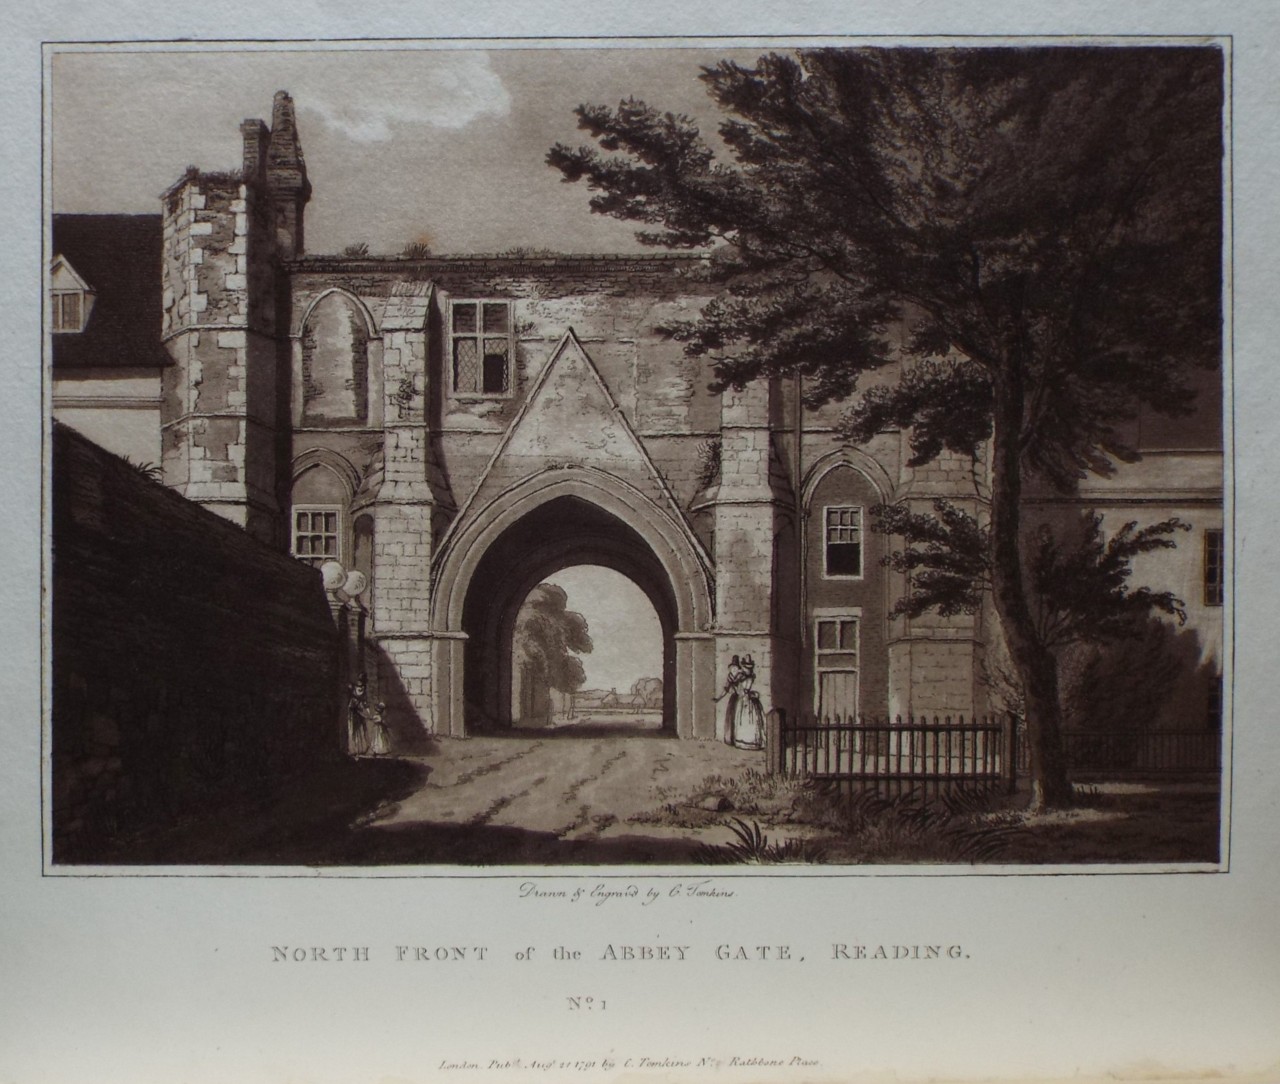 Aquatint - North Front of the Abbey Gate, Reading. - Tomkins